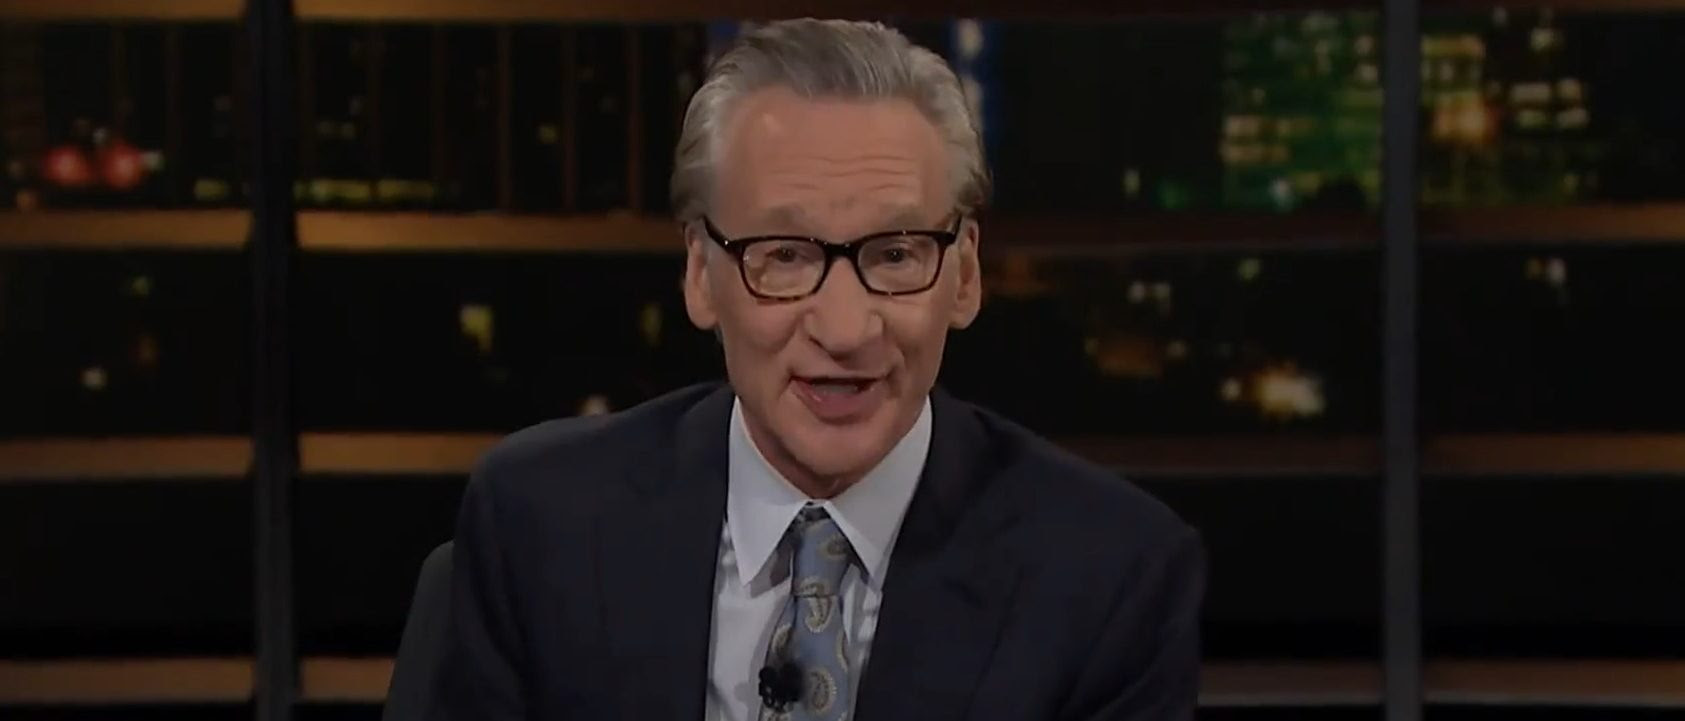 Bill Maher Compares The ‘Woke’ Mob To Enforcers Of Mao’s Cultural Revolution